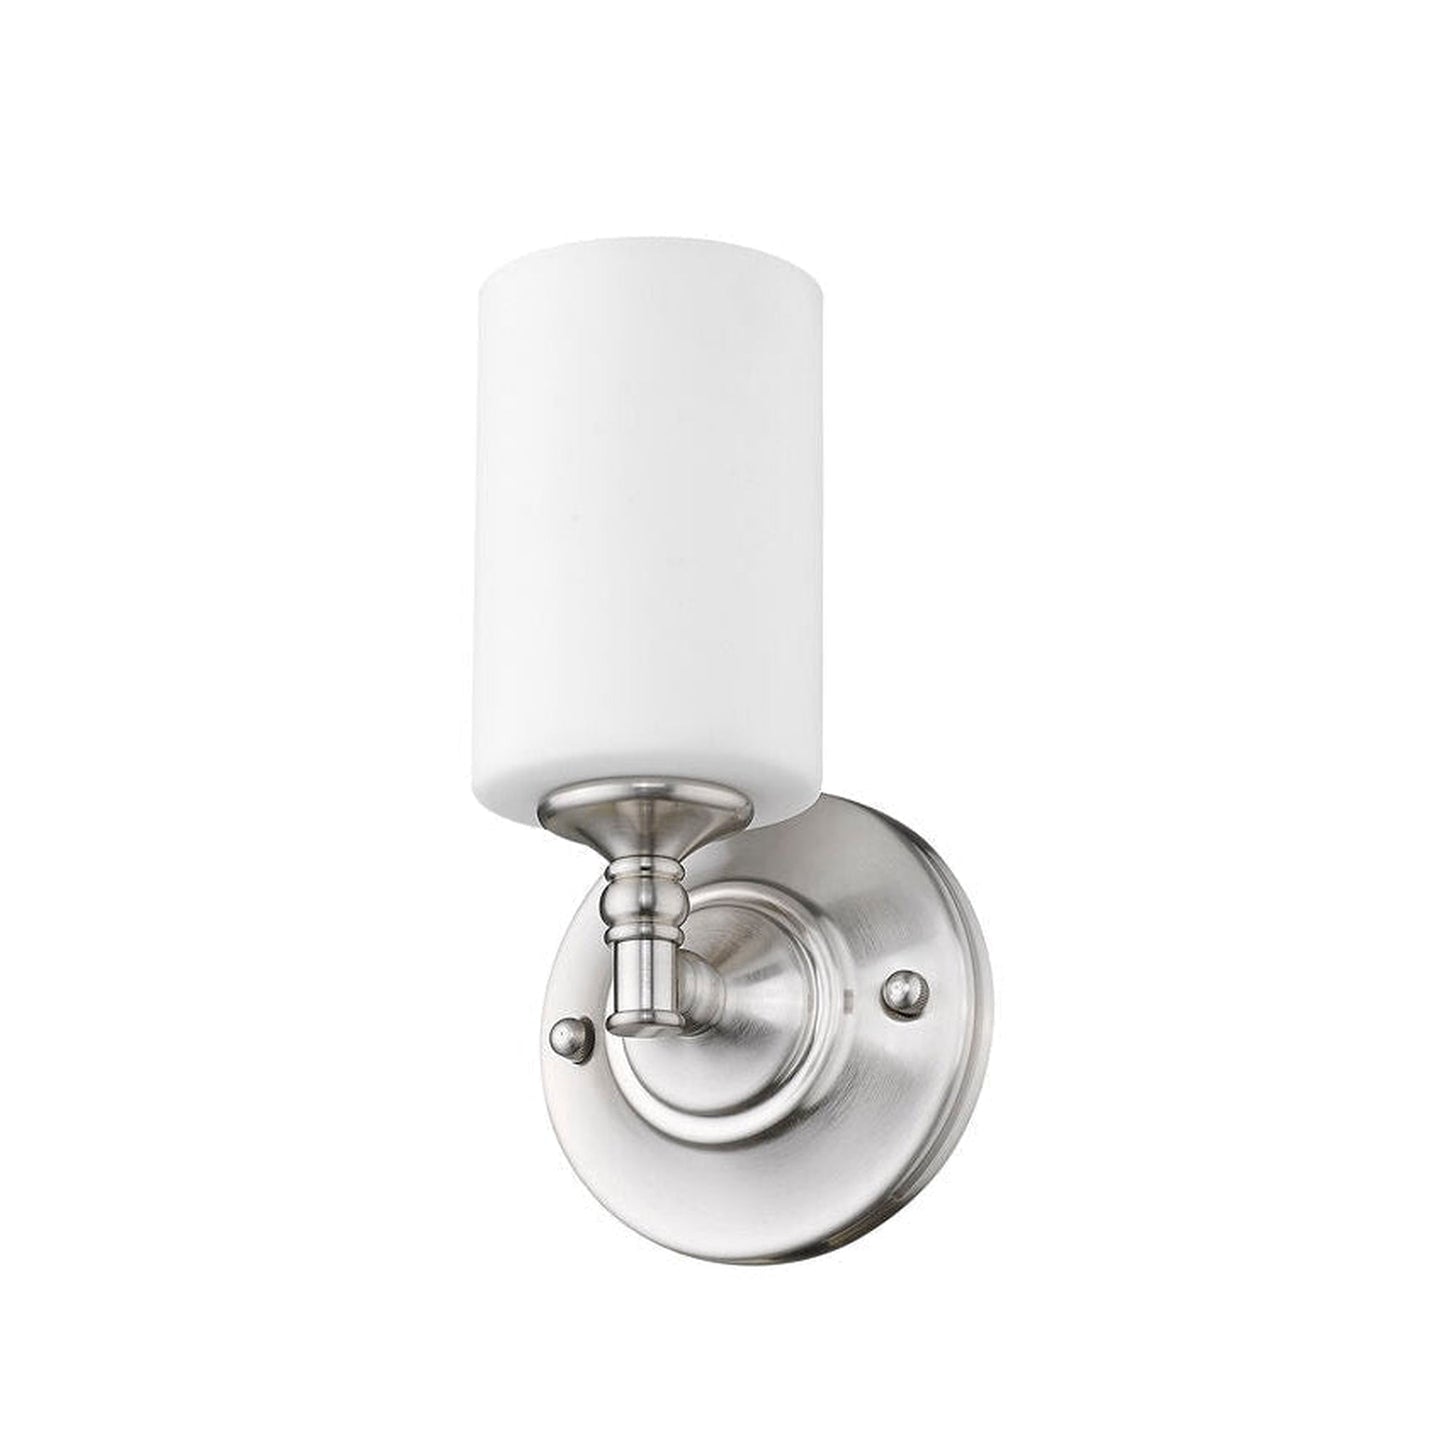 Z-Lite Cannondale 6" 1-Light Brushed Nickel Wall Sconce With Matte Opal Glass Shade